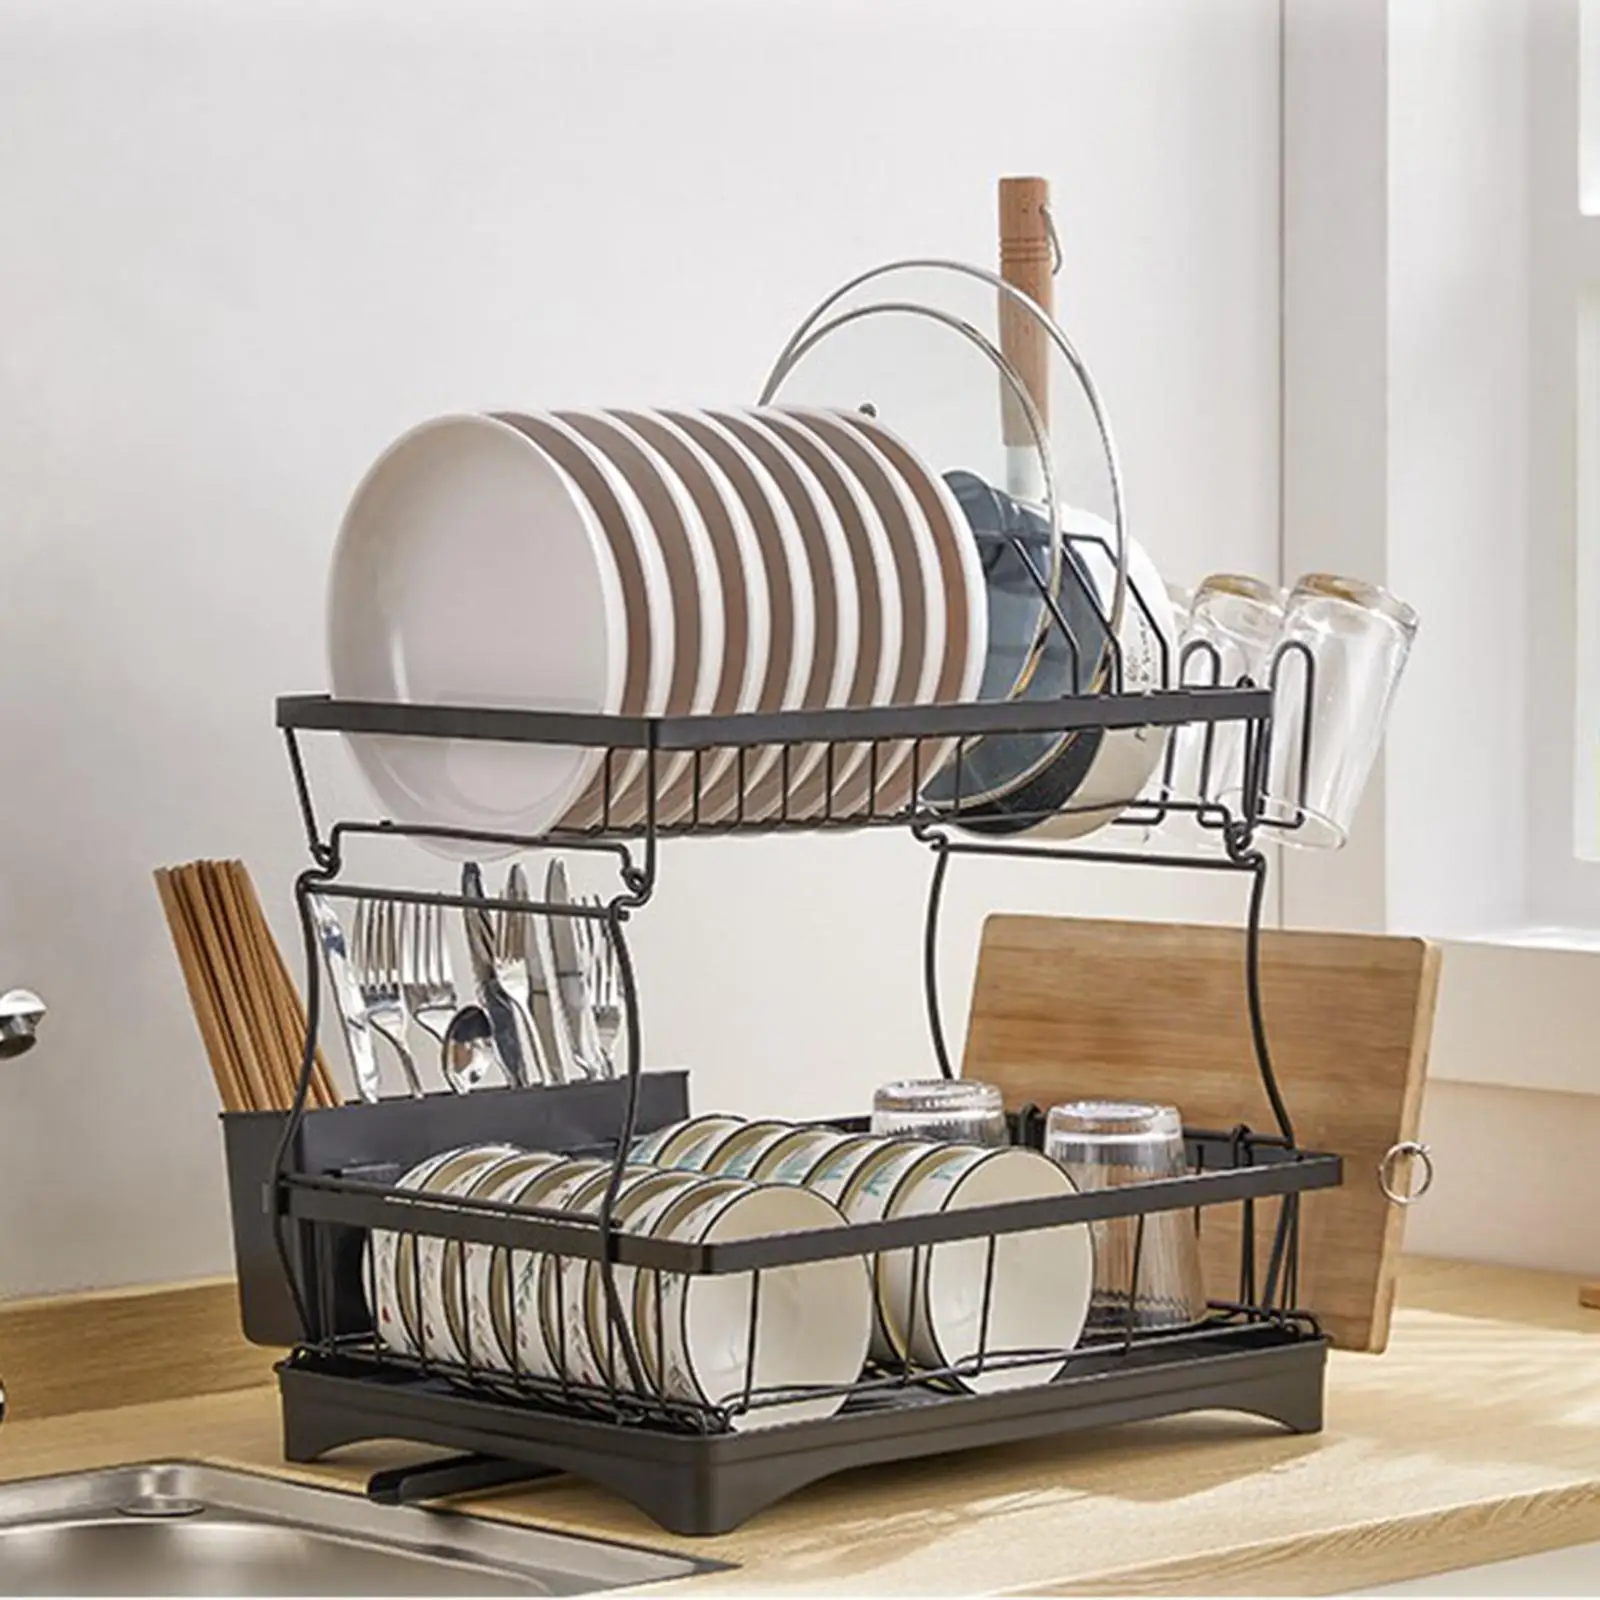 2 Tiers Dish Drying Rack with Drainboard Utensils Holder for Restaurant Countertop